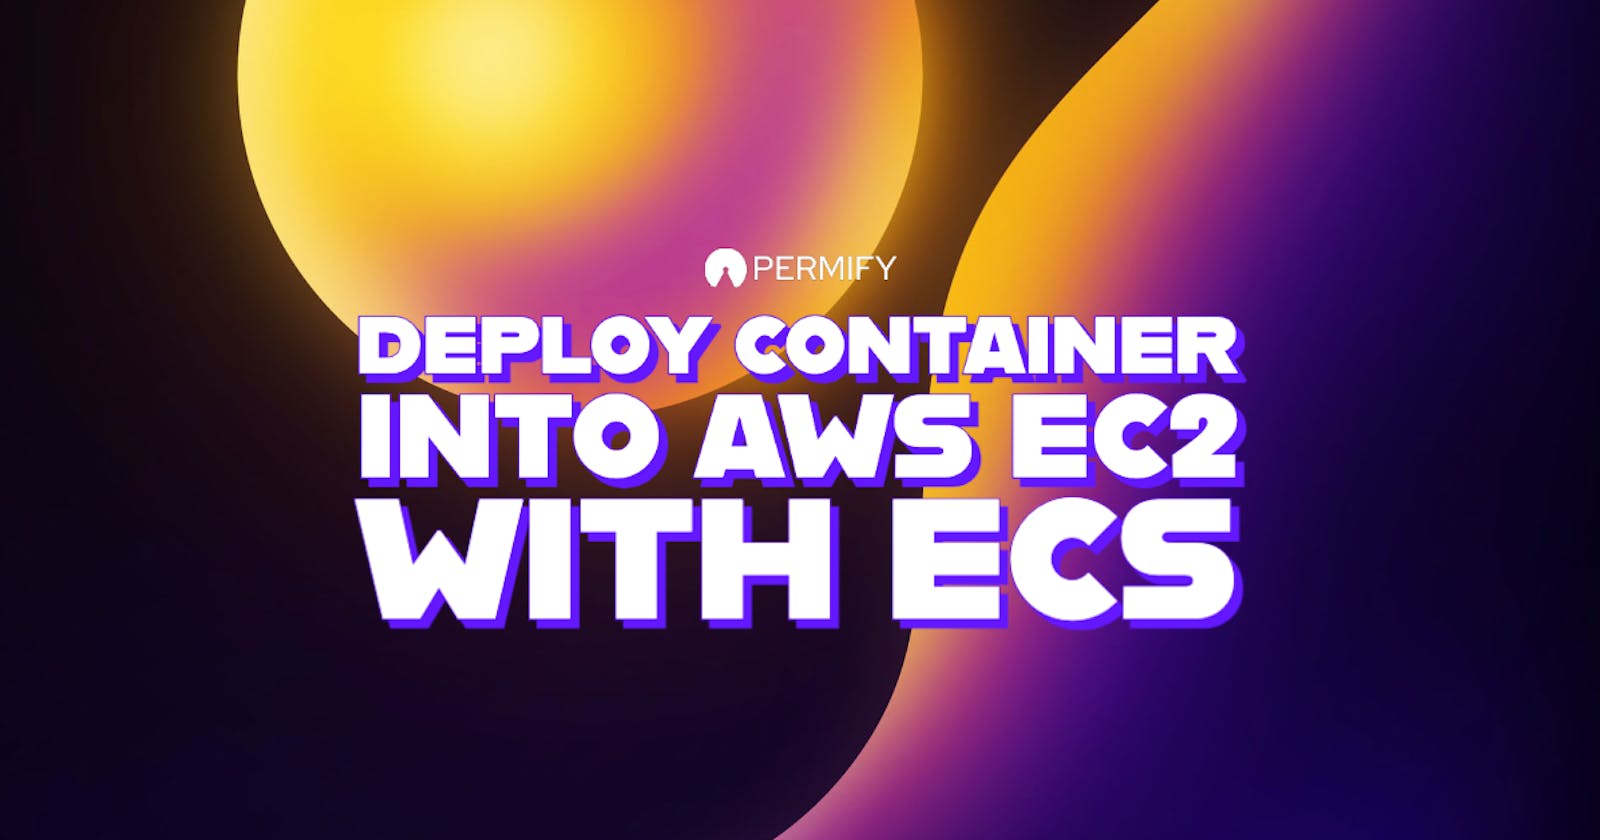 How to Deploy Your Container into AWS EC2 with ECS